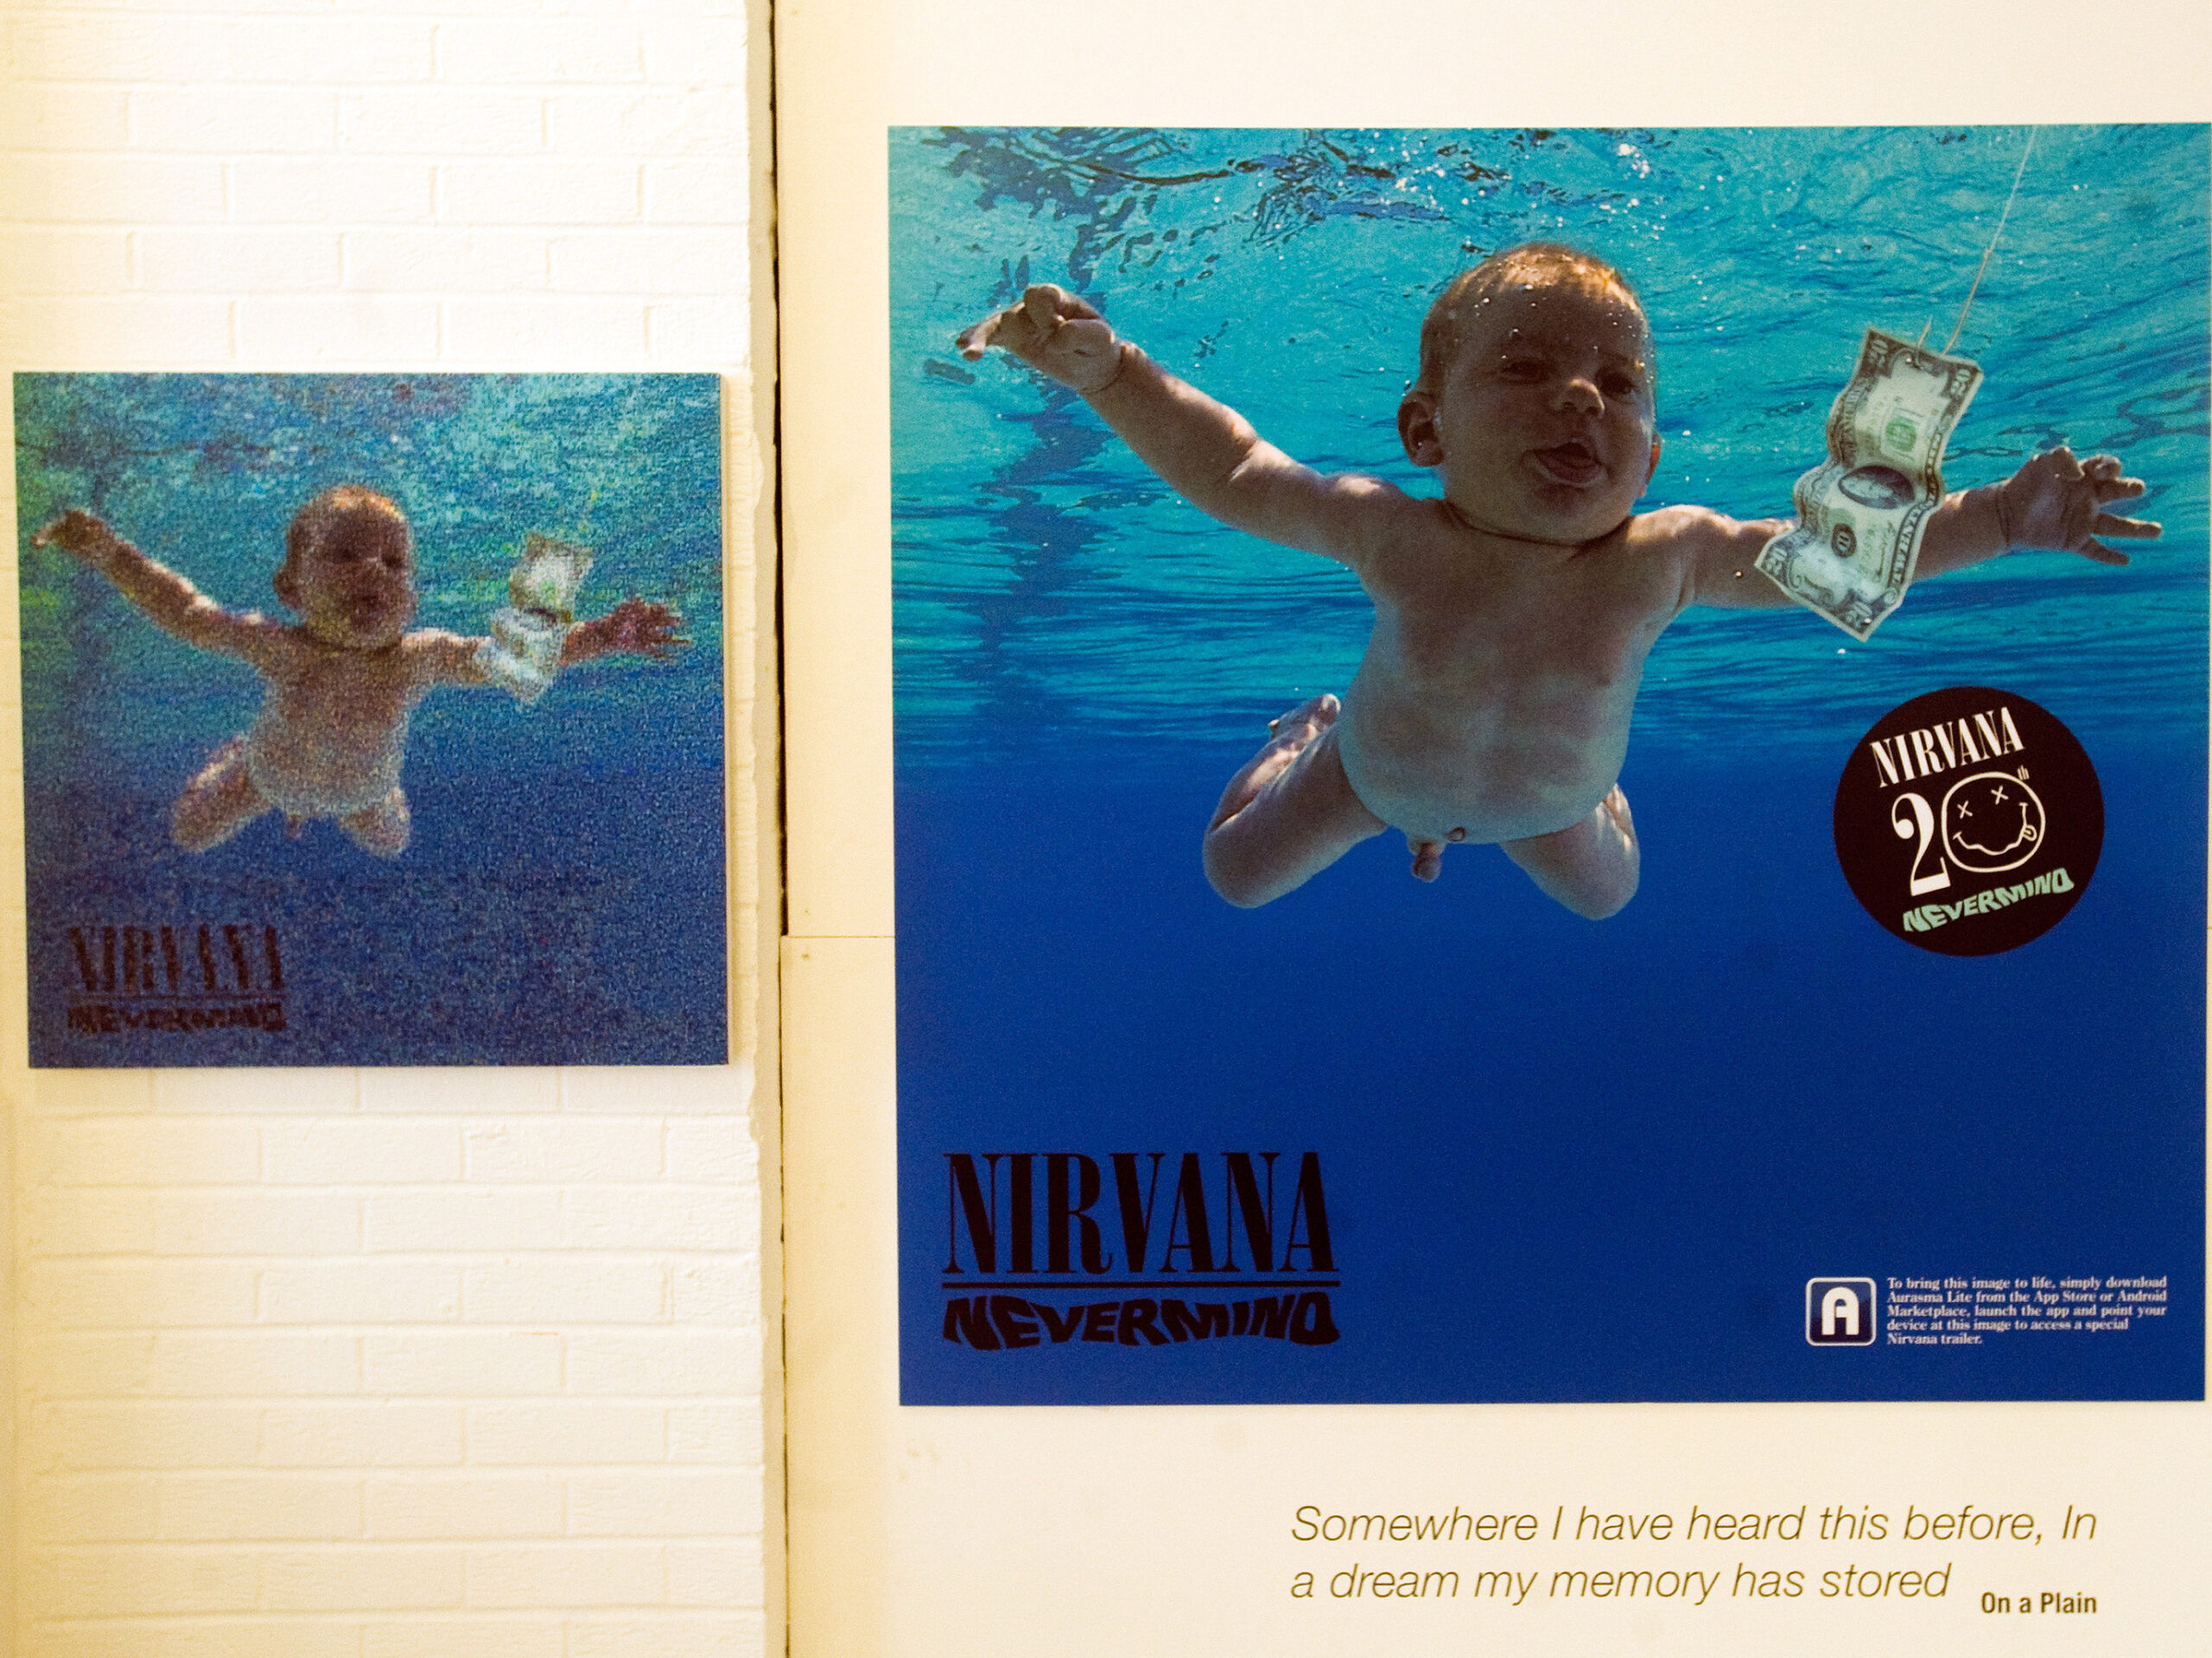 Featured image for “A lawsuit over Nirvana’s ‘Nevermind’ baby album cover has been dismissed”